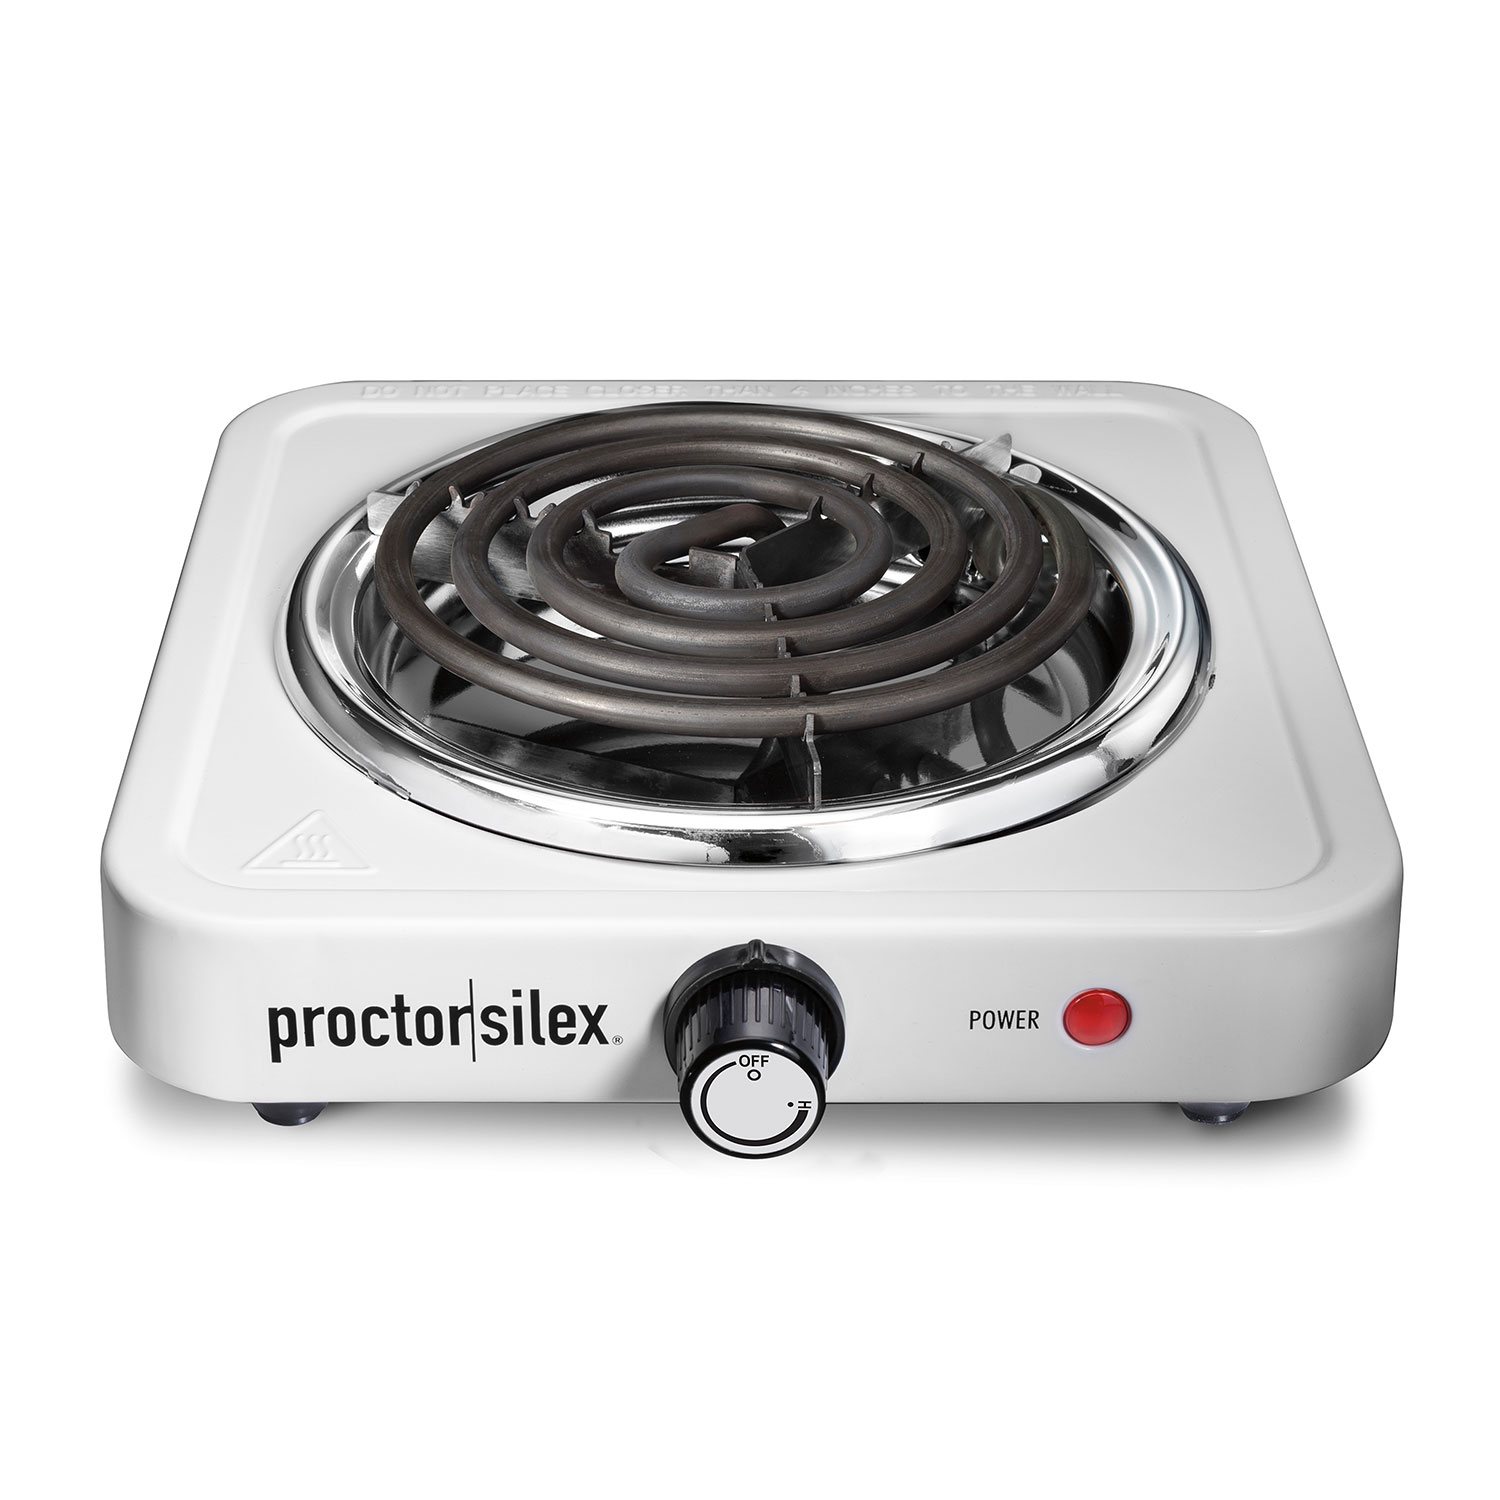 Single Electric Burner Cooktop, White - 34106 Small Size